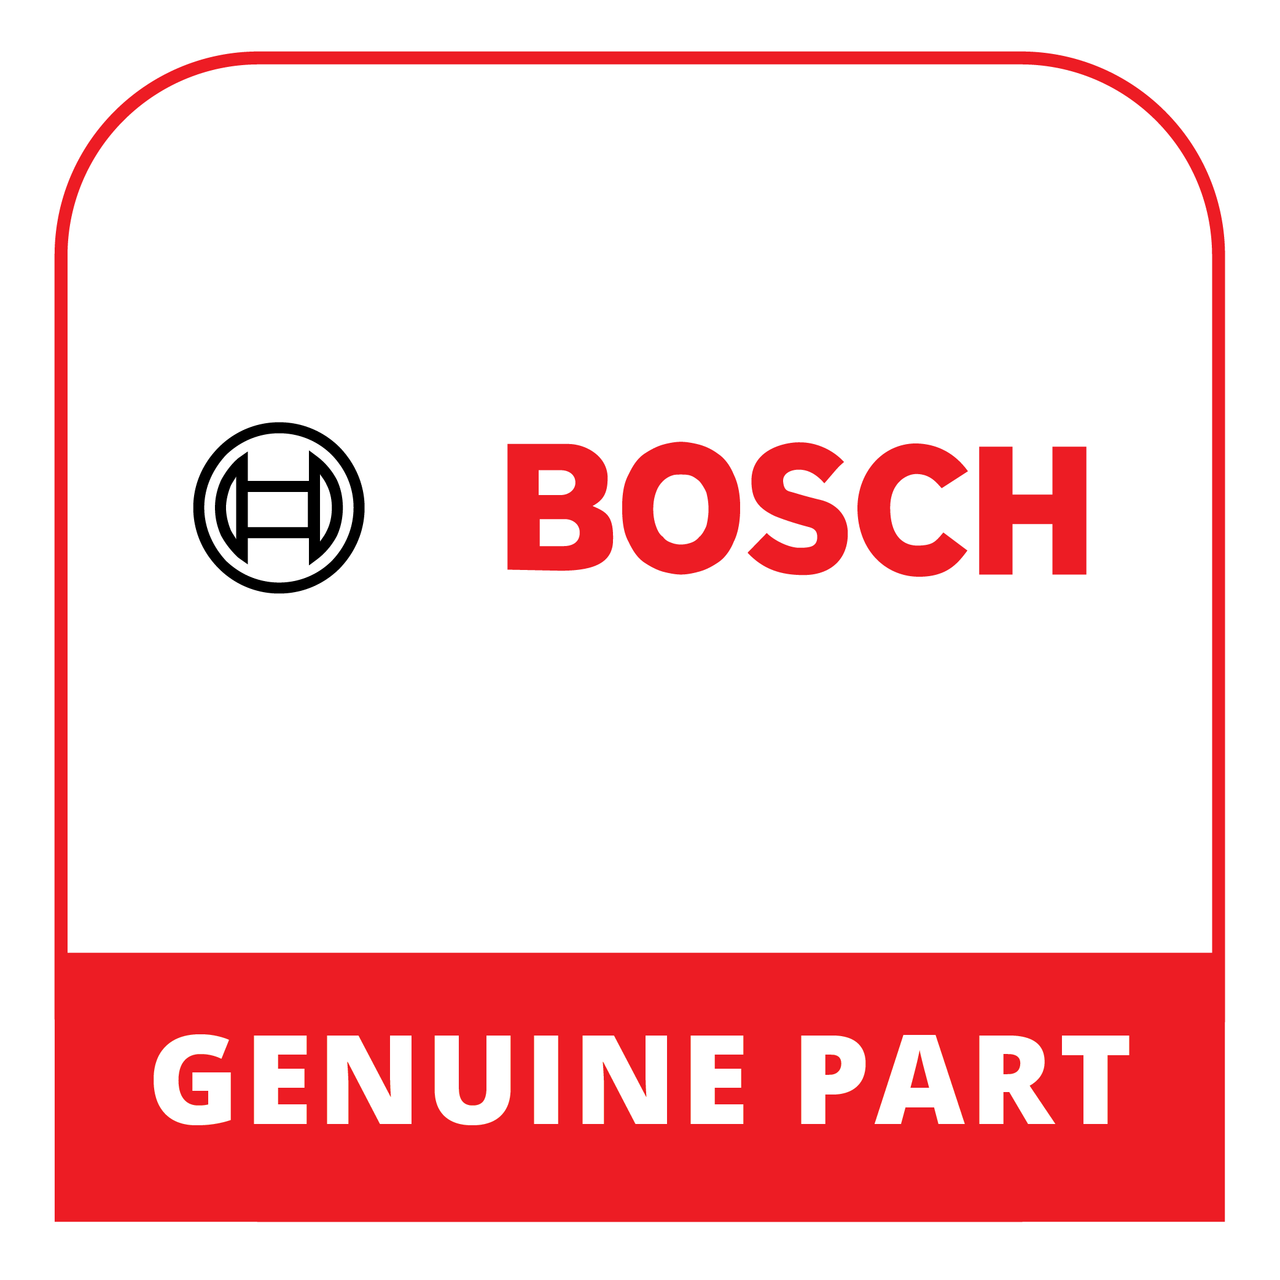 Bosch (Thermador) 17008500 - Milk Container - Genuine Bosch (Thermador) Part